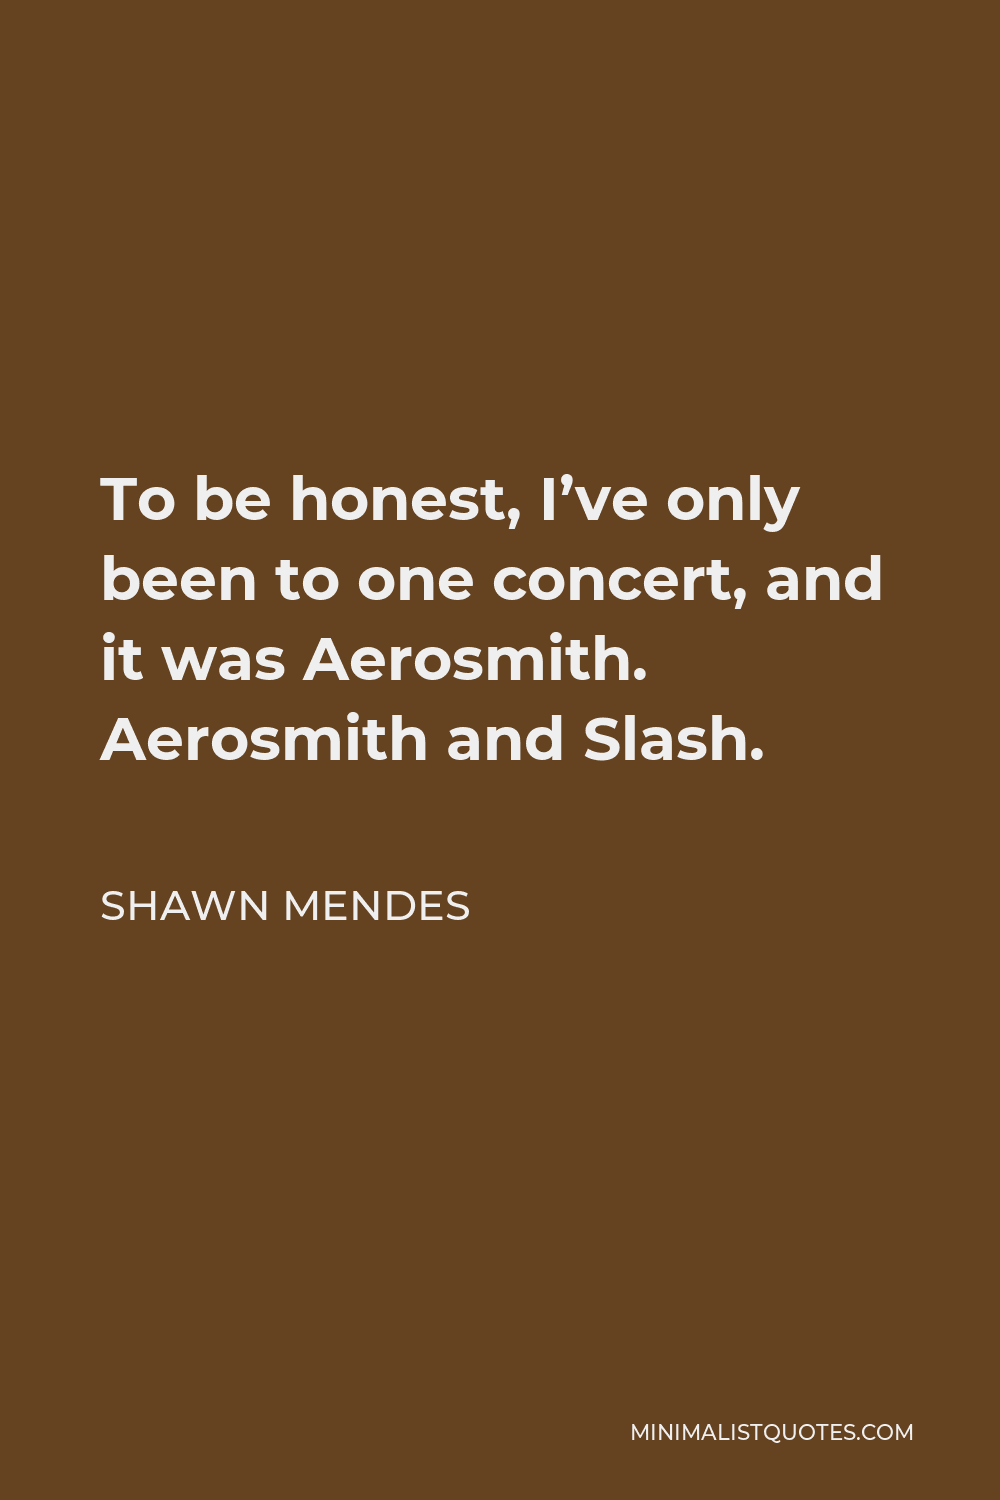 Shawn Mendes Quote - To be honest, I’ve only been to one concert, and it was Aerosmith. Aerosmith and Slash.